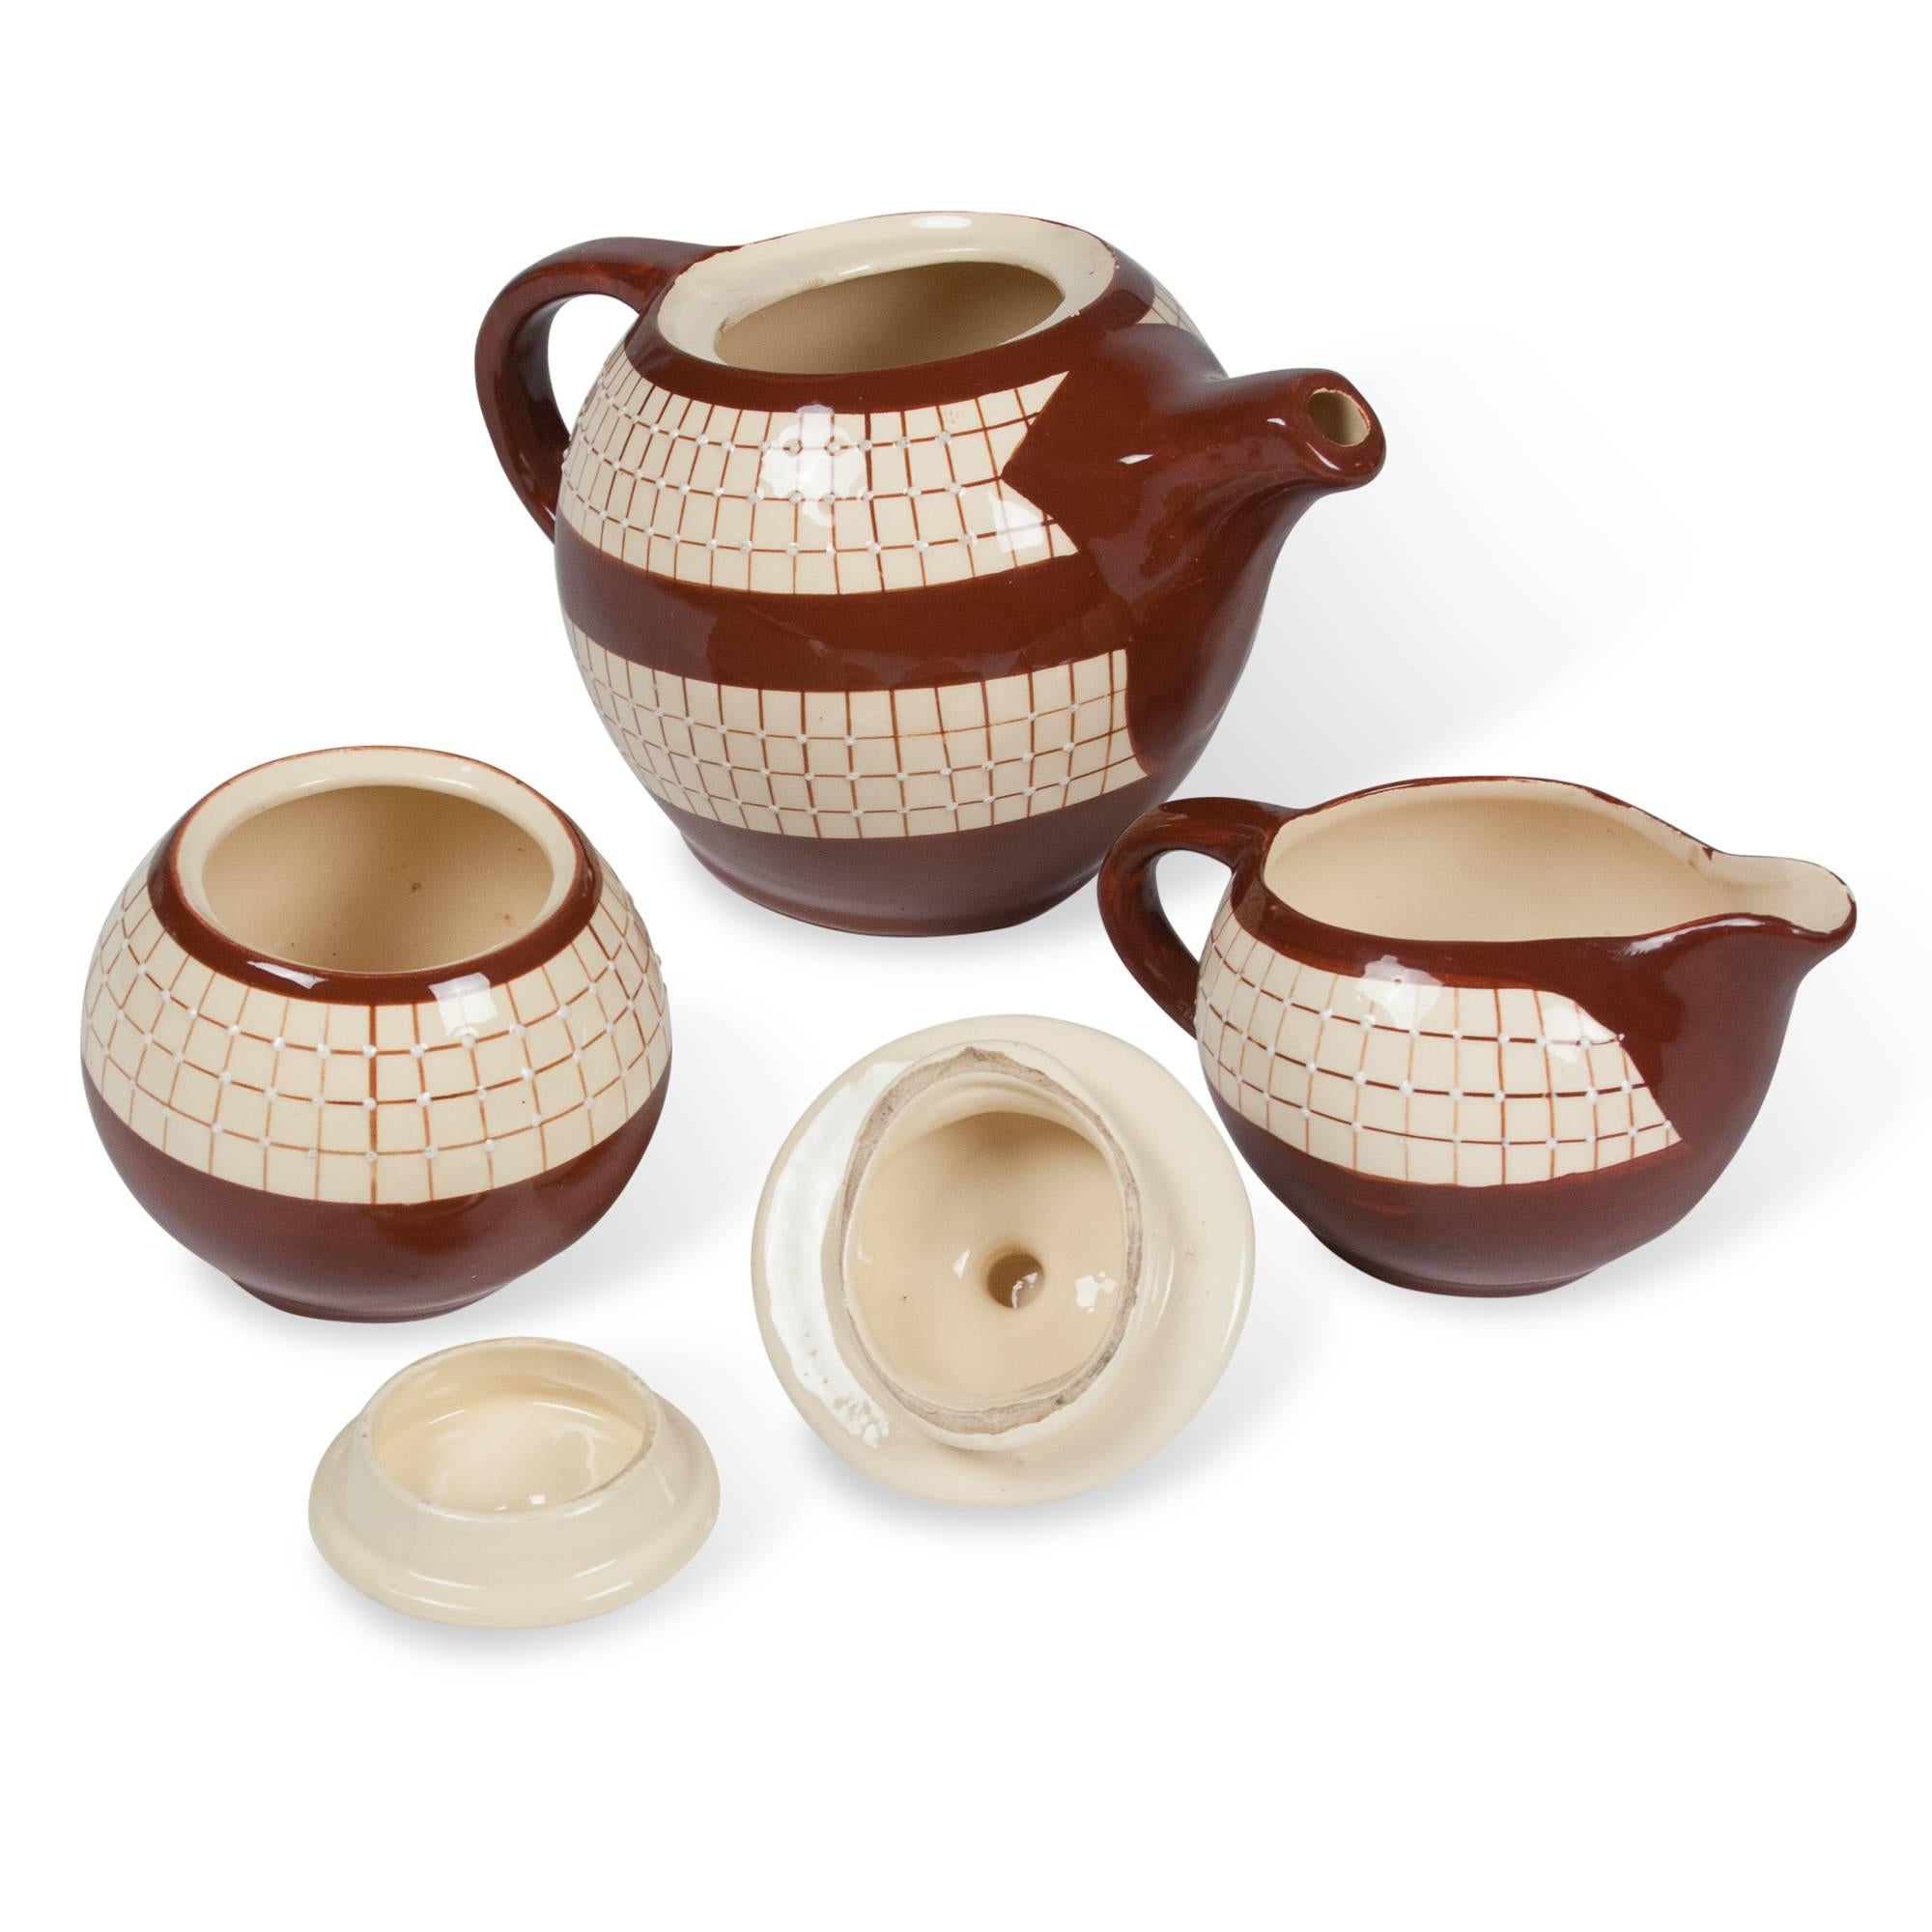 Three-Piece Ceramic Tea Service by Longchamps In Excellent Condition For Sale In Brooklyn, NY